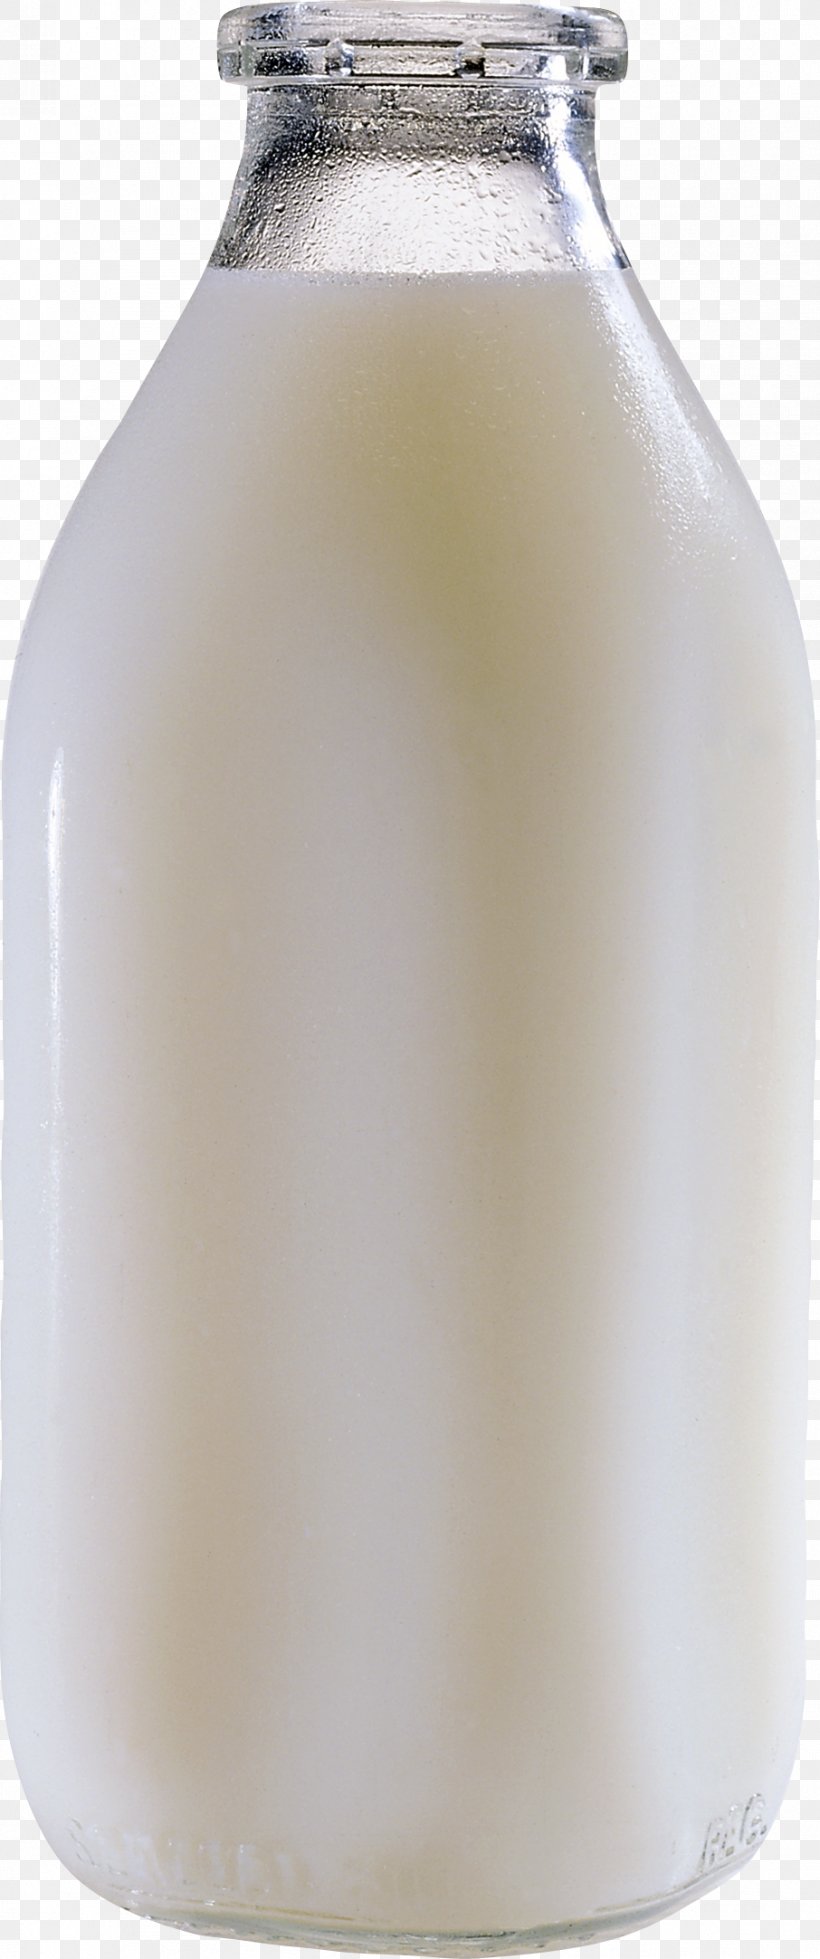 Cow's Milk Bottle Dairy Product, PNG, 906x2165px, Milk, Baby Bottles, Bottle, Dairy Product, Dairy Products Download Free